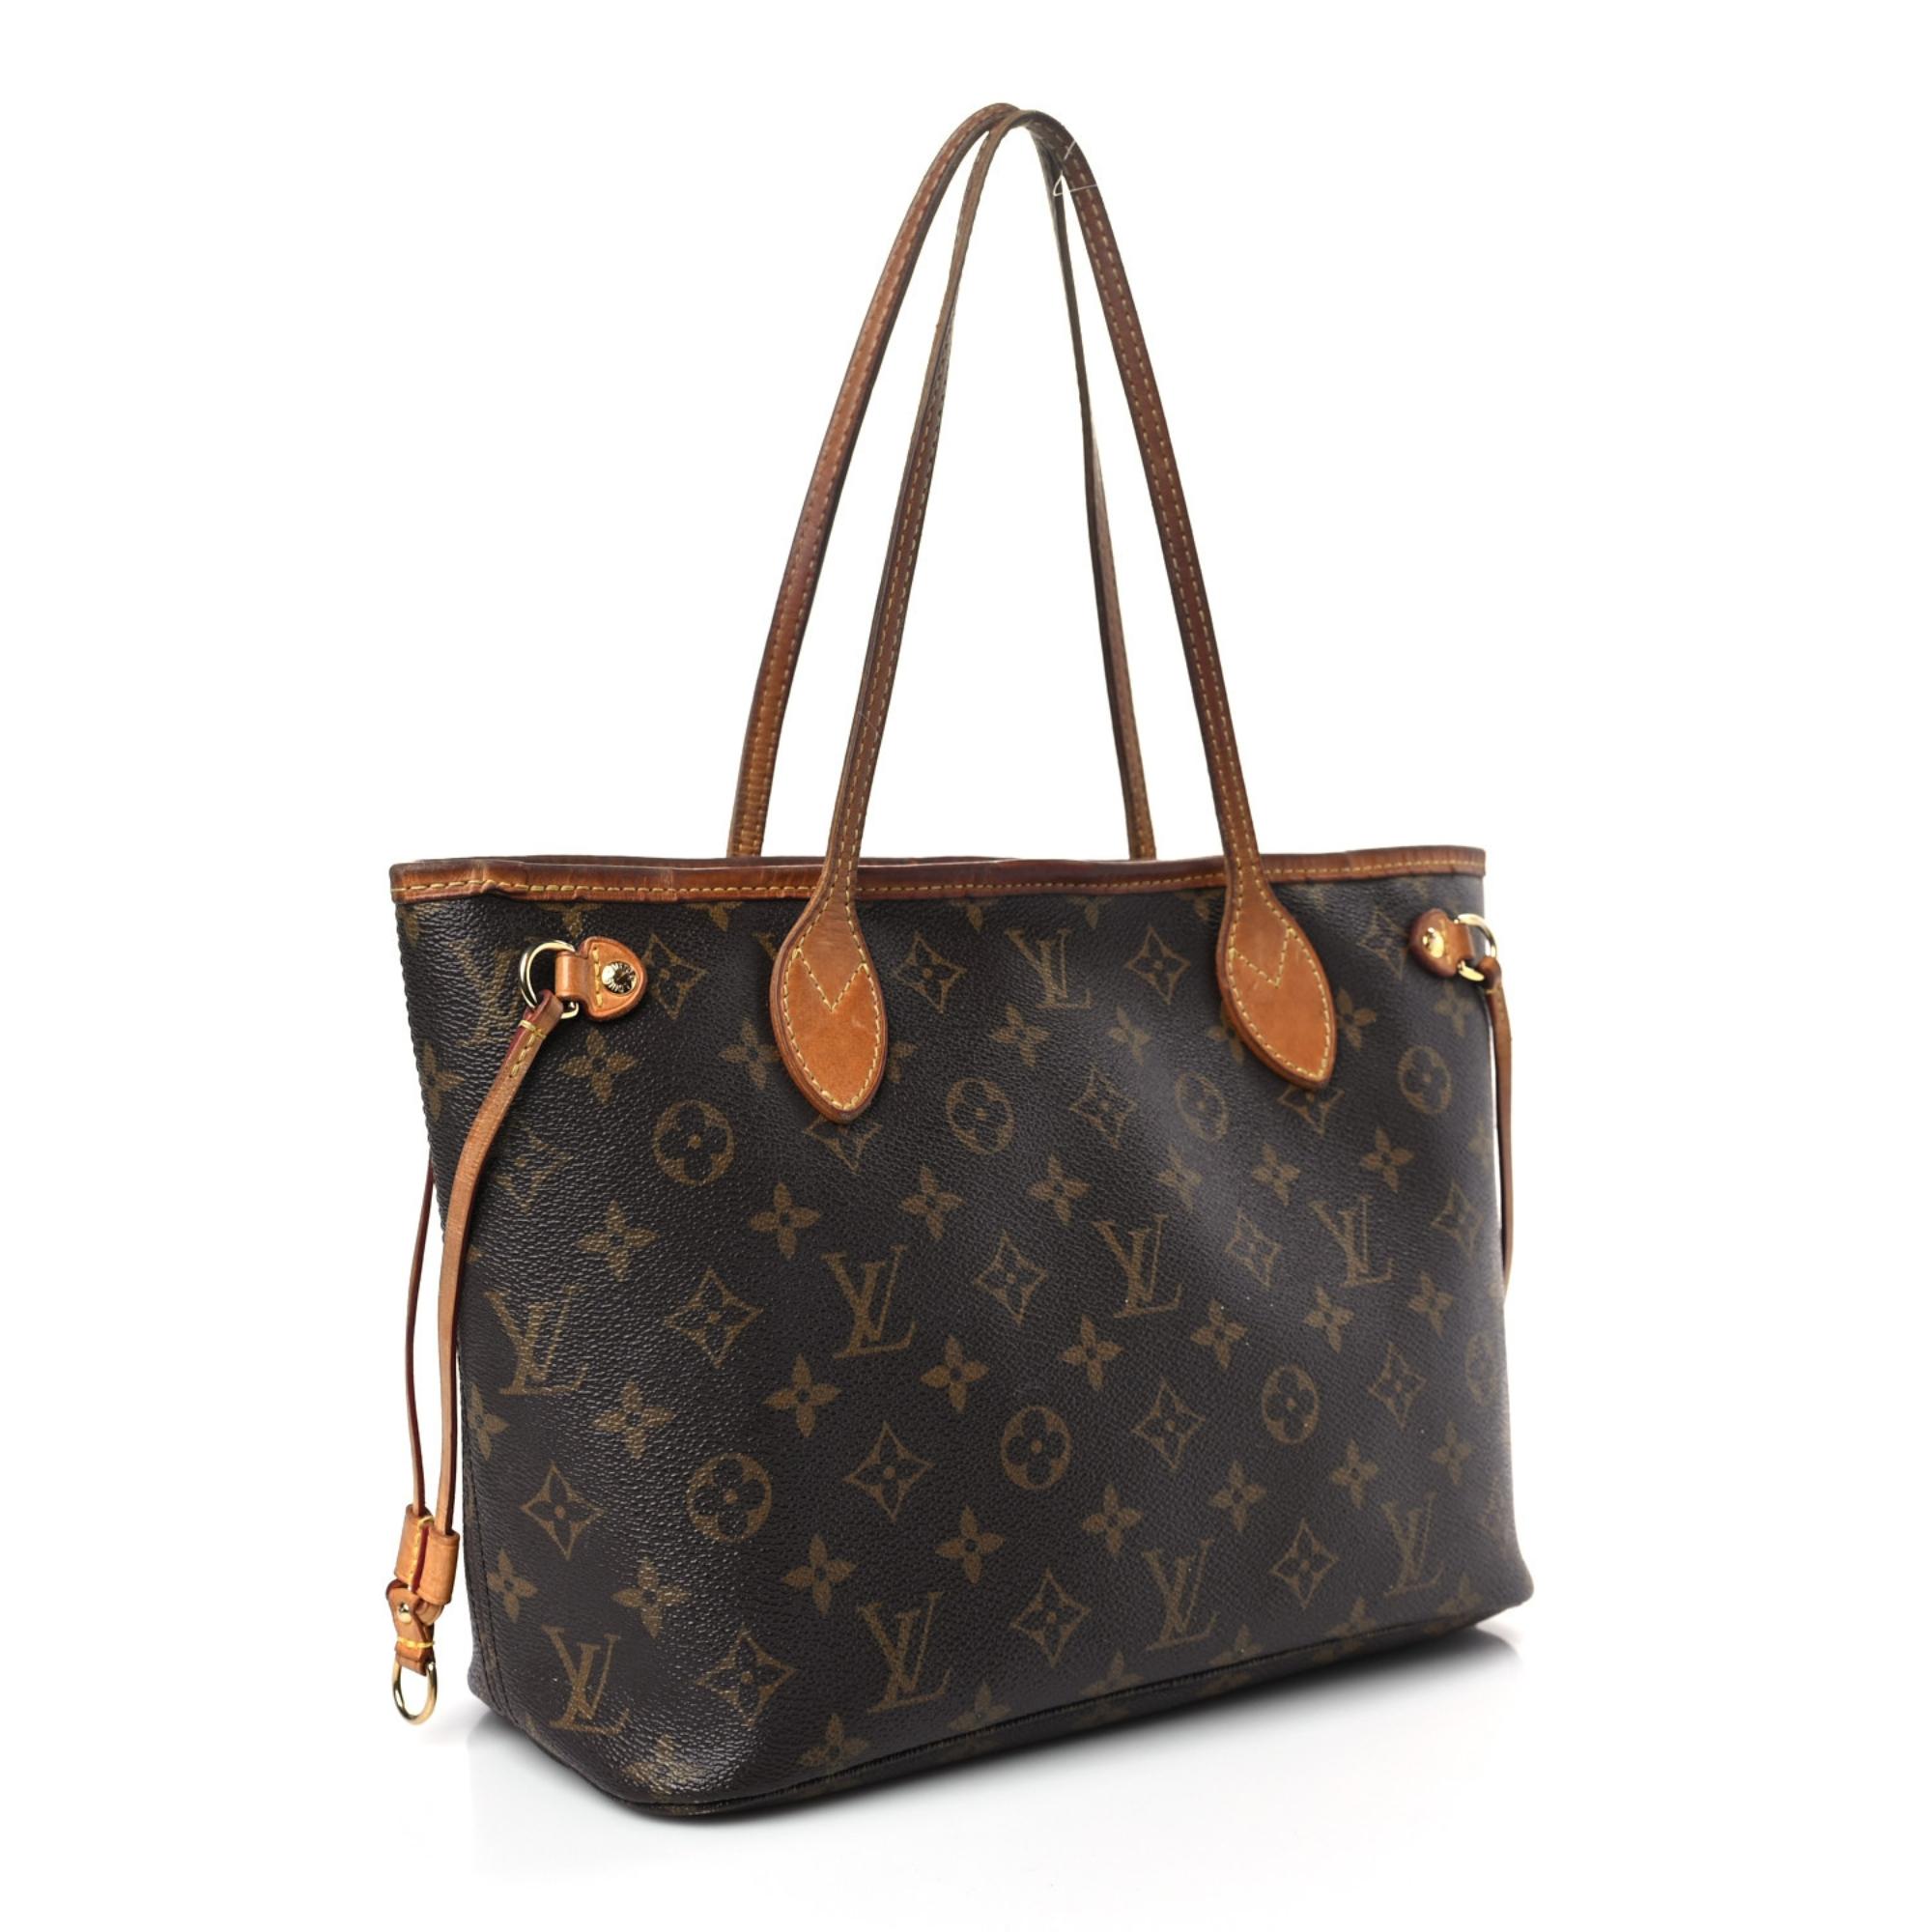 This is the PM (petit modèle or small model) of the Louis Vuitton neverfull tote bag. This style in the PM size was discontented and is no longer available at the boutique.

This tote is made of classic Louis Vuitton monogram coated canvas. The tote